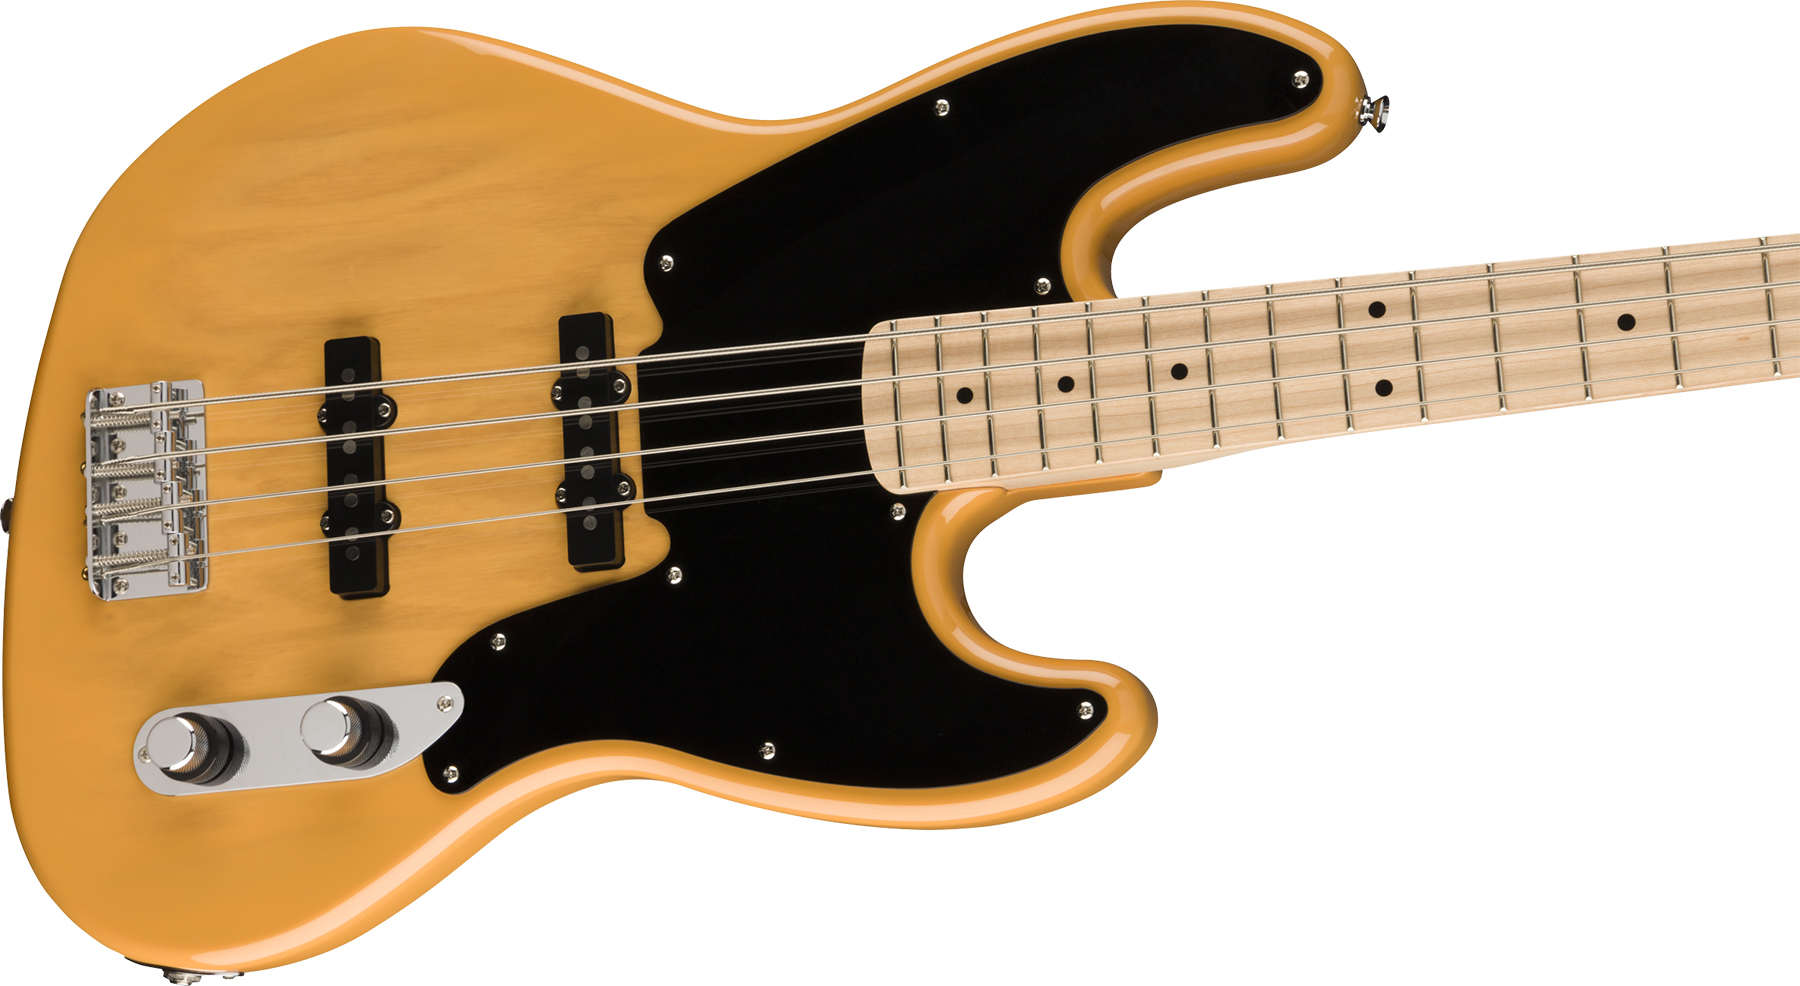 Squier Jazz Bass 1954 Paranormal Mn - Butterscotch Blonde - Solid body electric bass - Variation 2